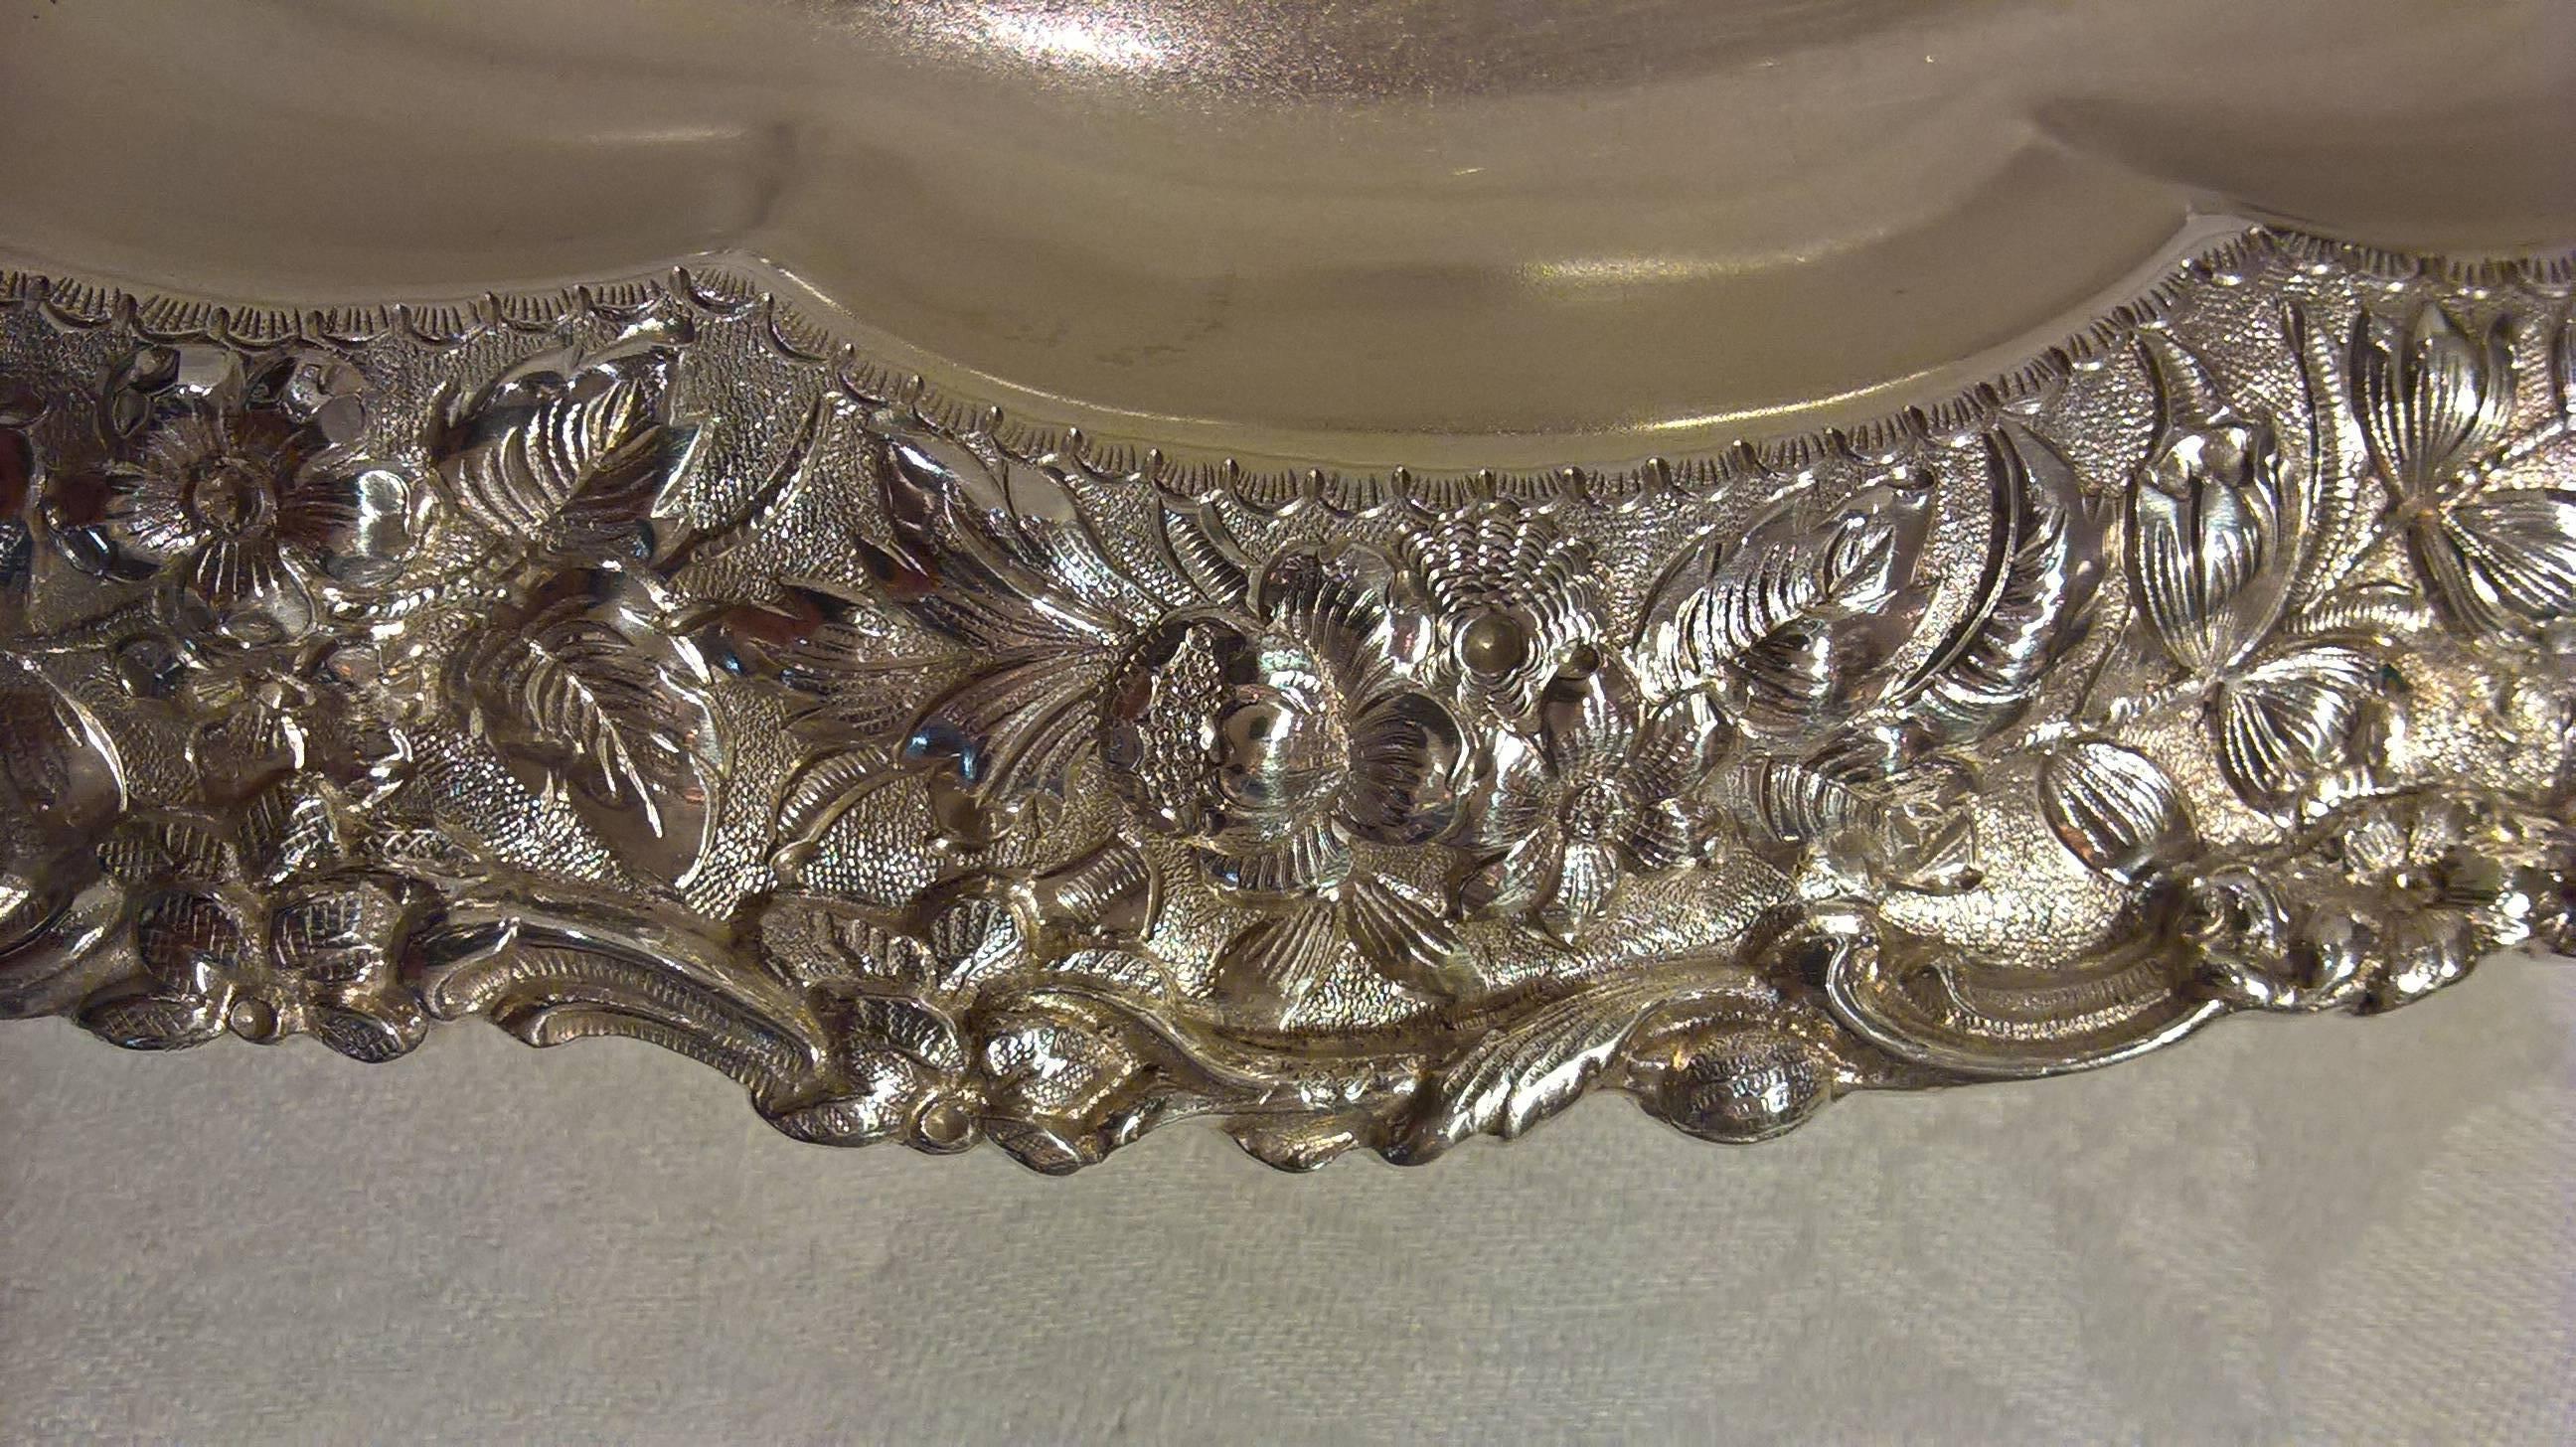 Art Nouveau sterling silver bowl with bright floral repousse. Asymmetric rim with flowers and fern leaves. Bowl rests on four scrolled paw feet. Hallmark includes pattern nr 6162 and directors letter M. Order nr 8008. Weight 610 gr. Beautiful